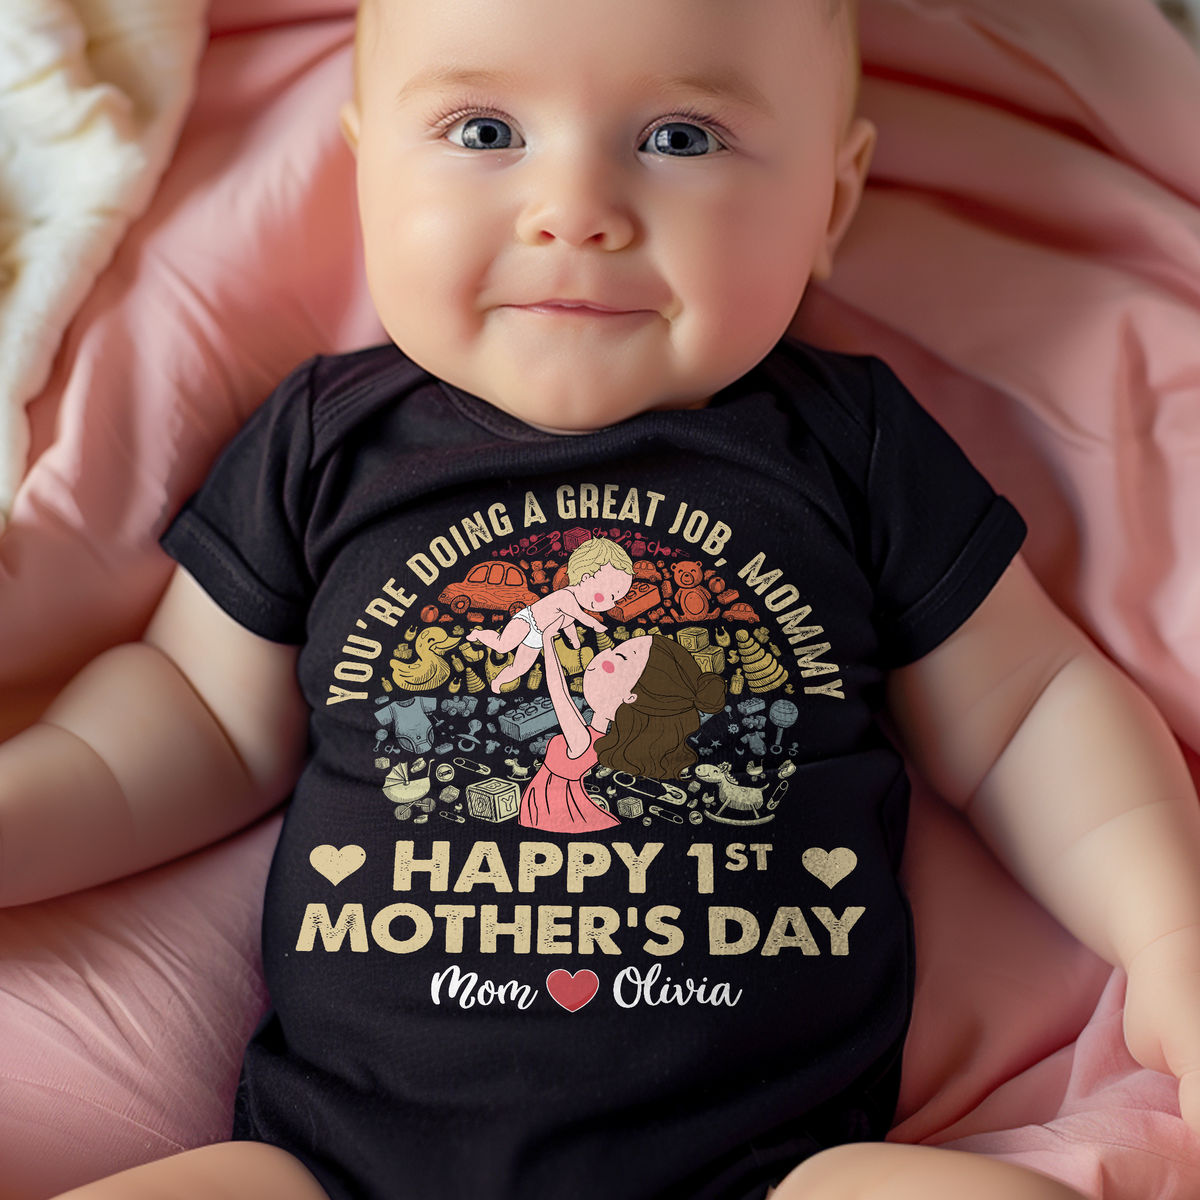 You're doing a great job mommy - Happy 1st Mother's Day (43375)